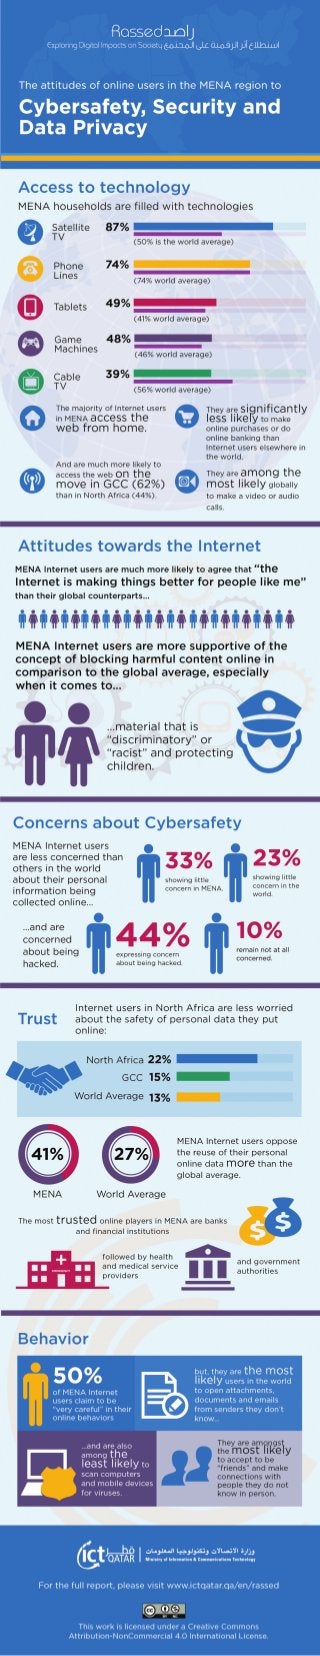 Infographic: The attitudes of Internet users in the Middle East towards Cybersafety, Security and Data Privacy 